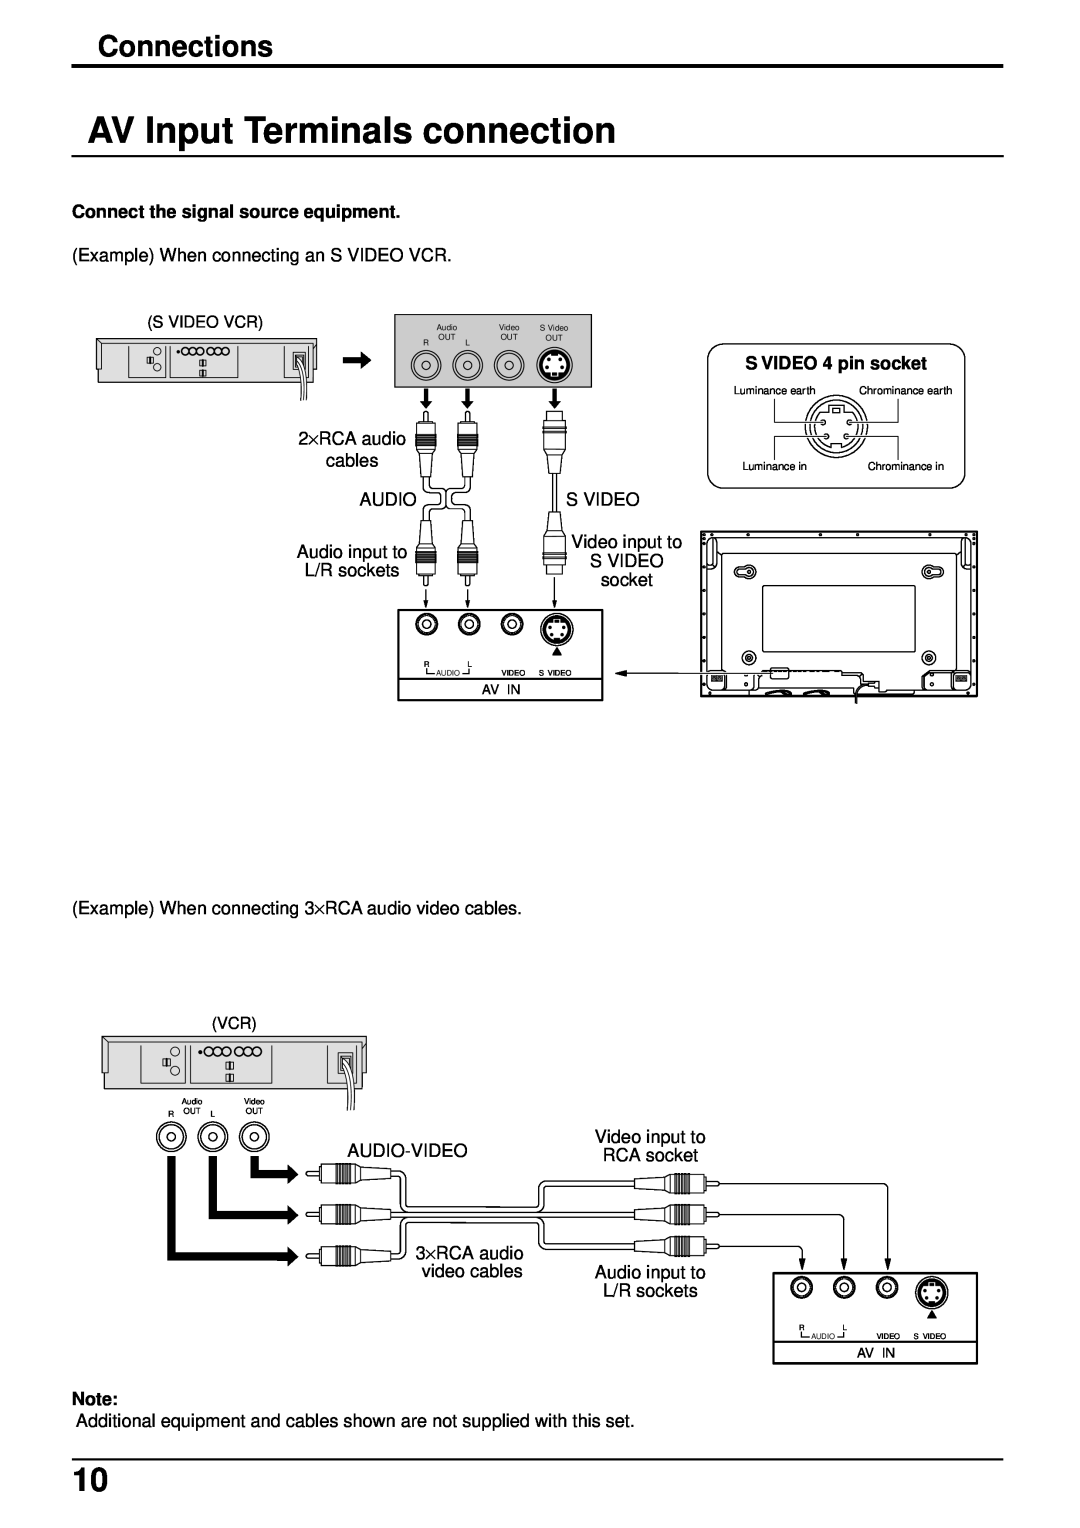 Panasonic TH-50PHW5, TH-42PHW5 manual AV Input Terminals connection, Connections 